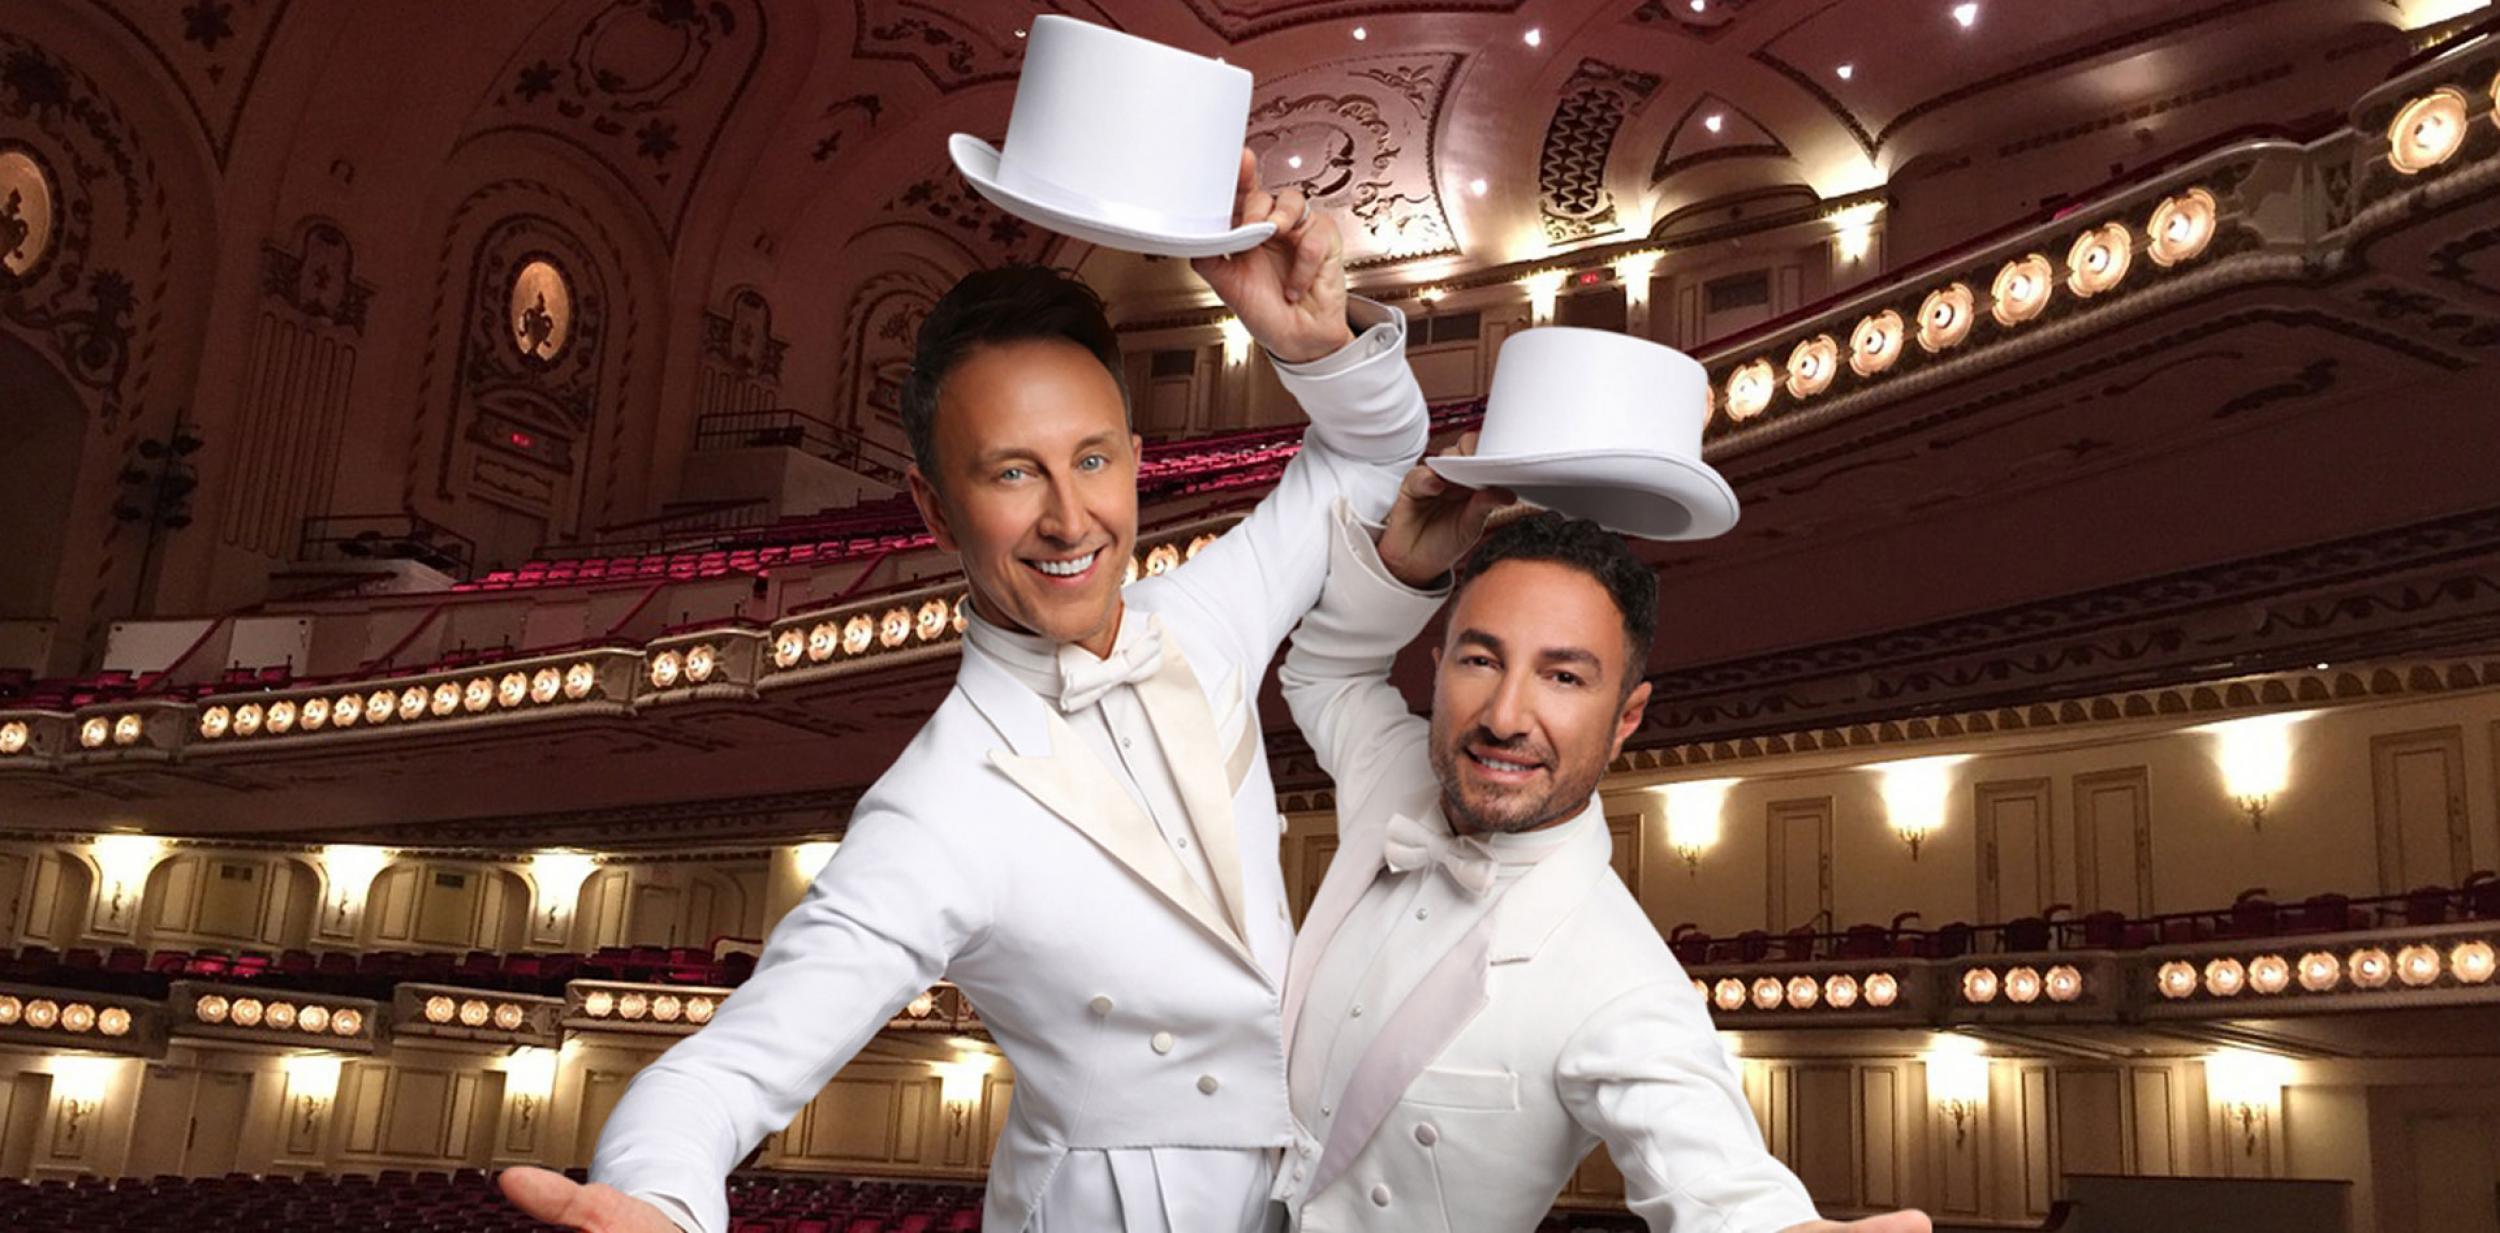 Male dancers in white suits taking off their top hats in a theatre auditorium